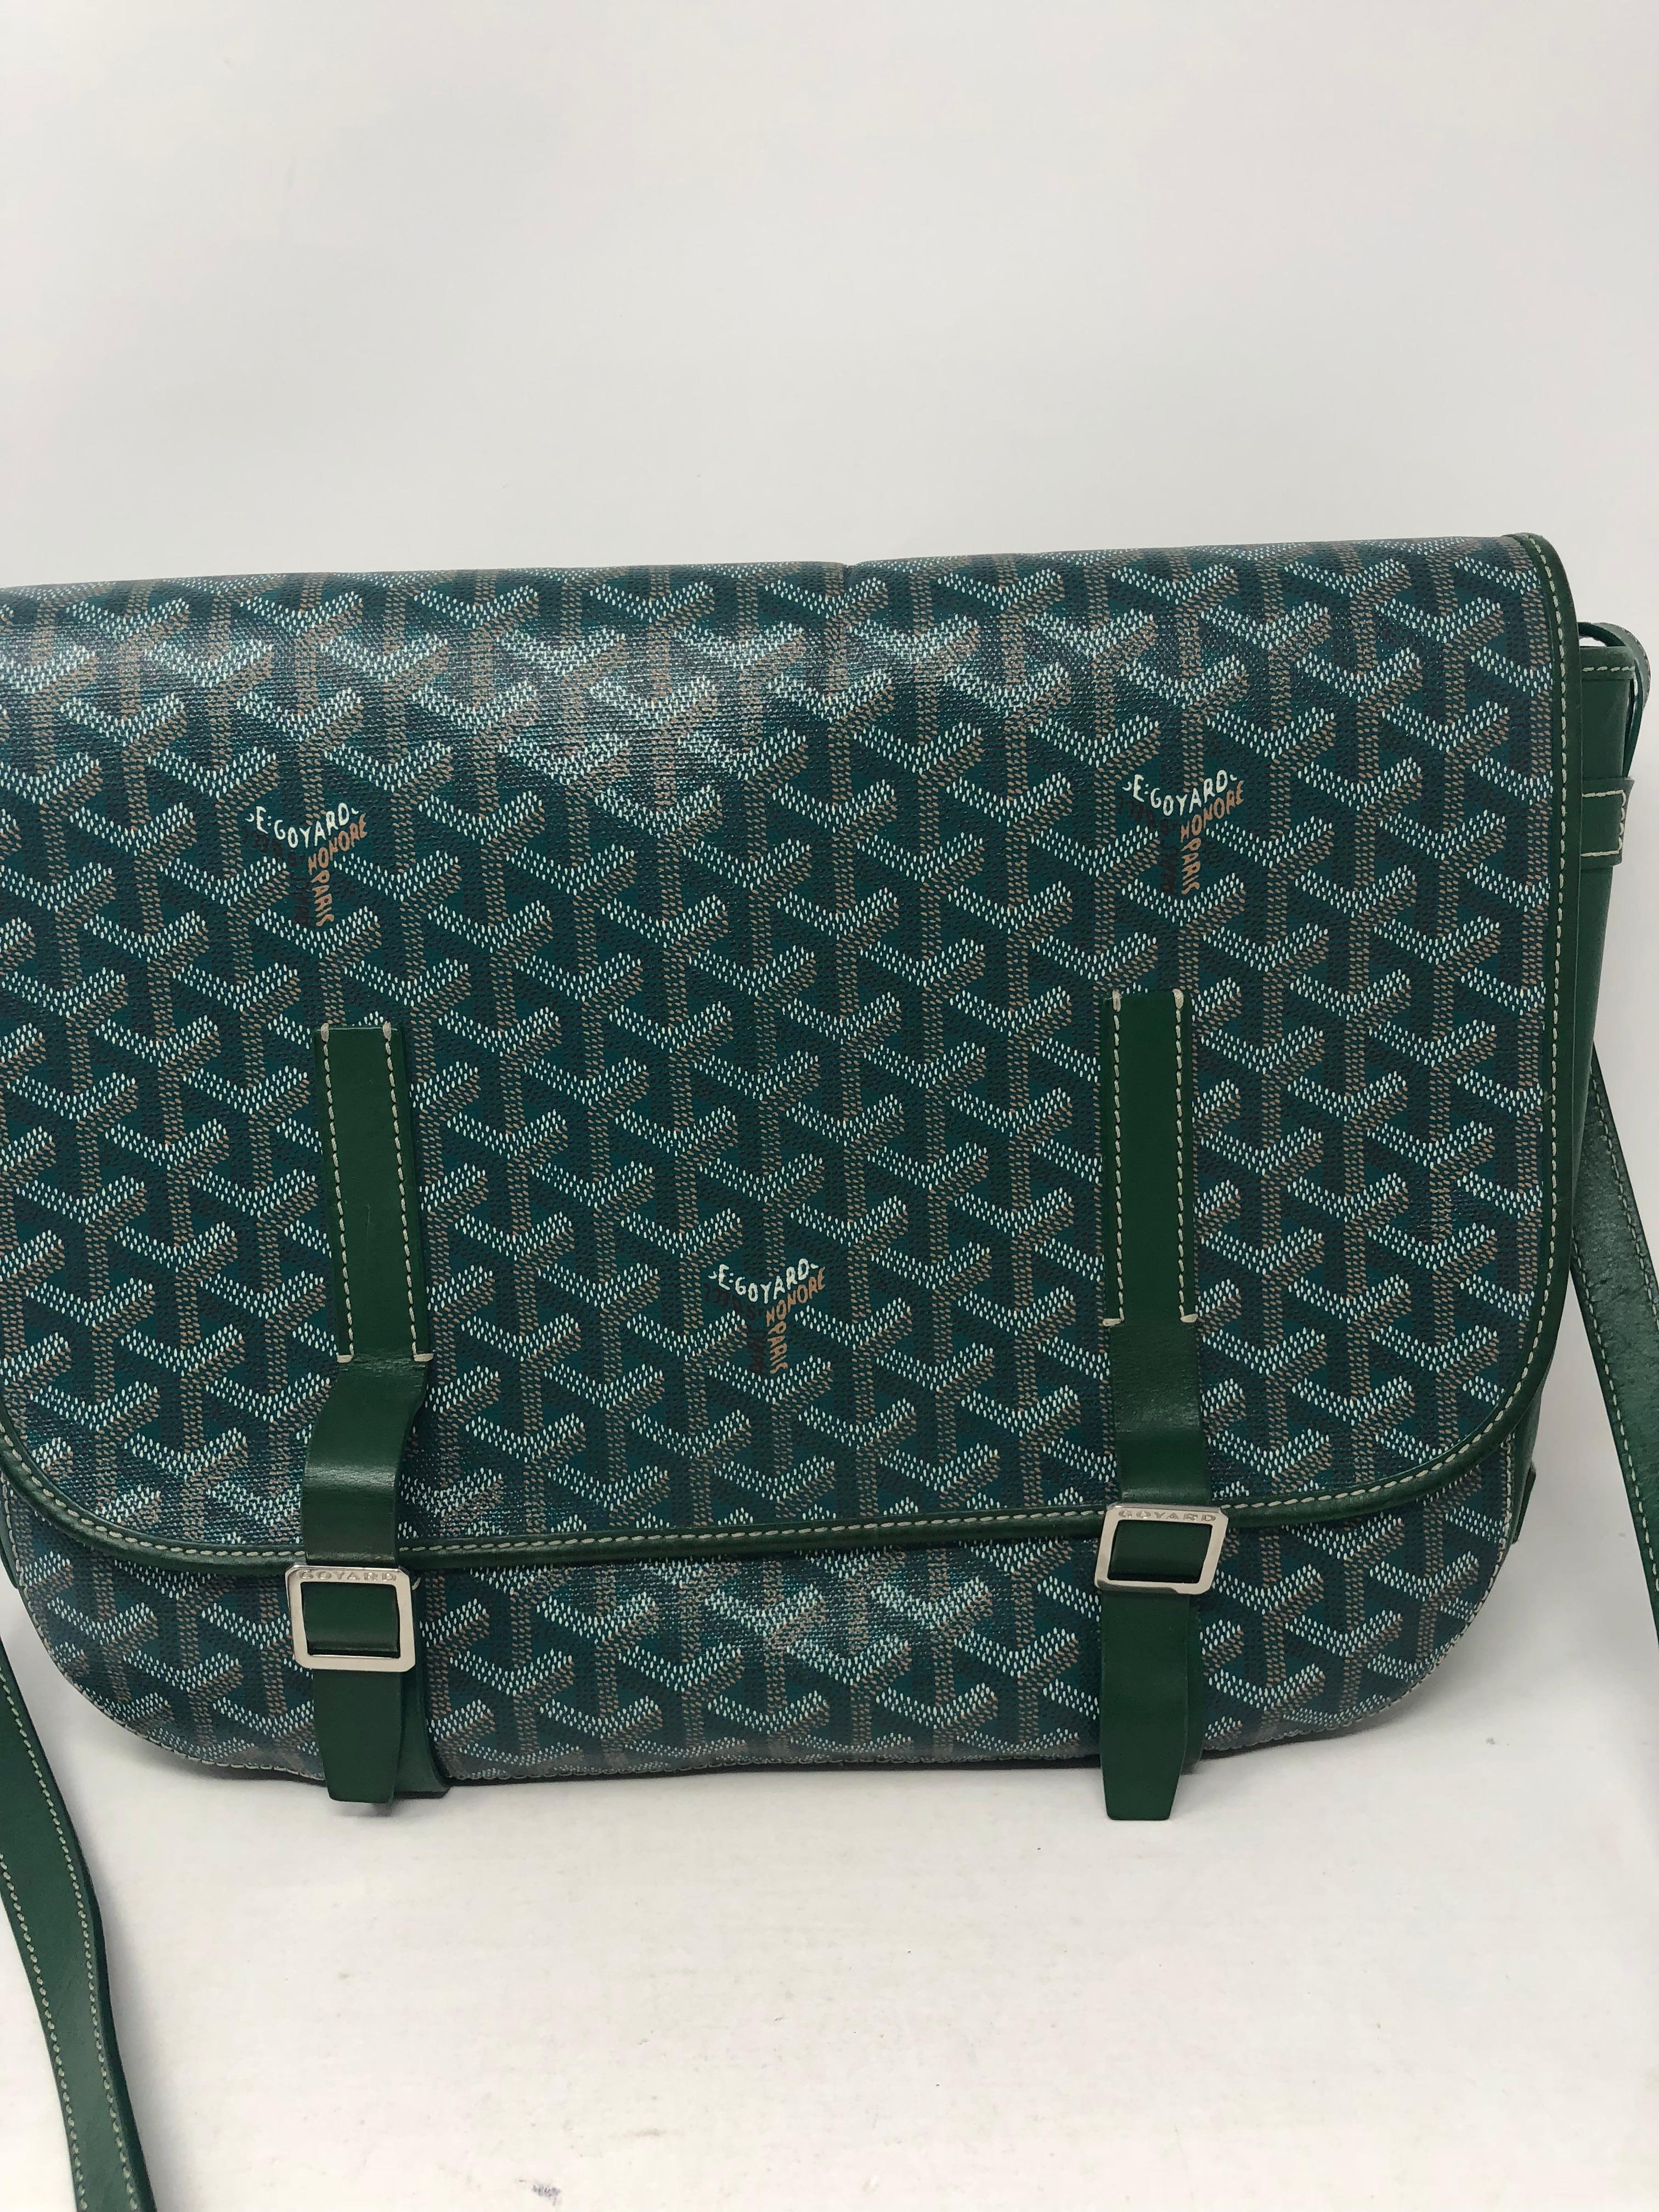 Green Goyard Crossbody Bag. Messenger style bag that can be worn crossbody. Dark Hunter green color. Beautiful bag in good condition. Rare color. Guaranteed authentic. 